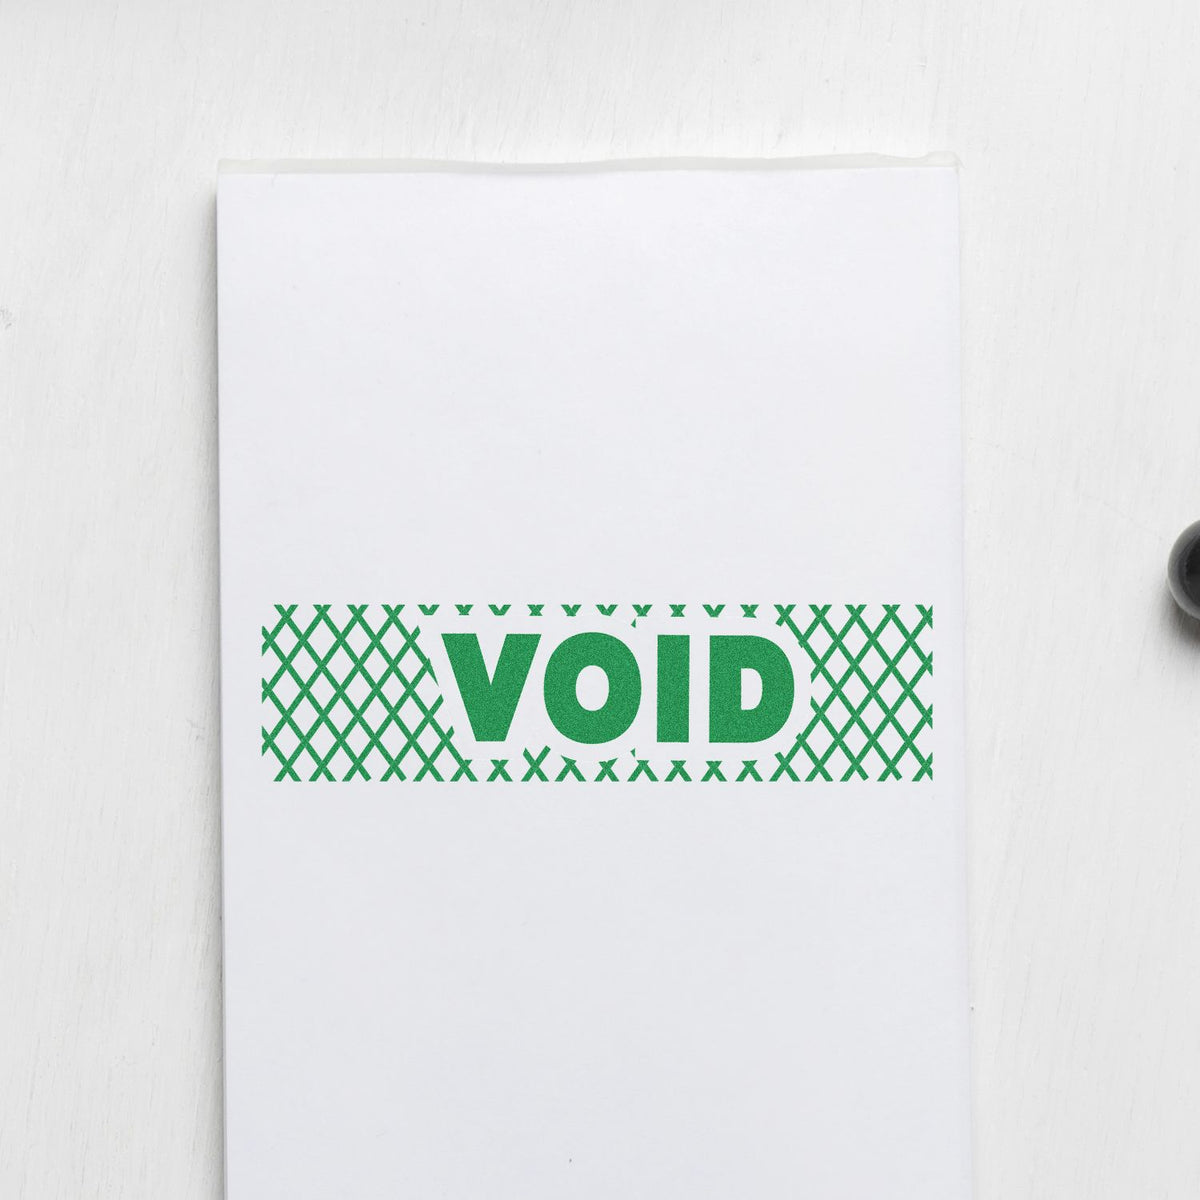 Void with Strikelines Rubber Stamp In Use